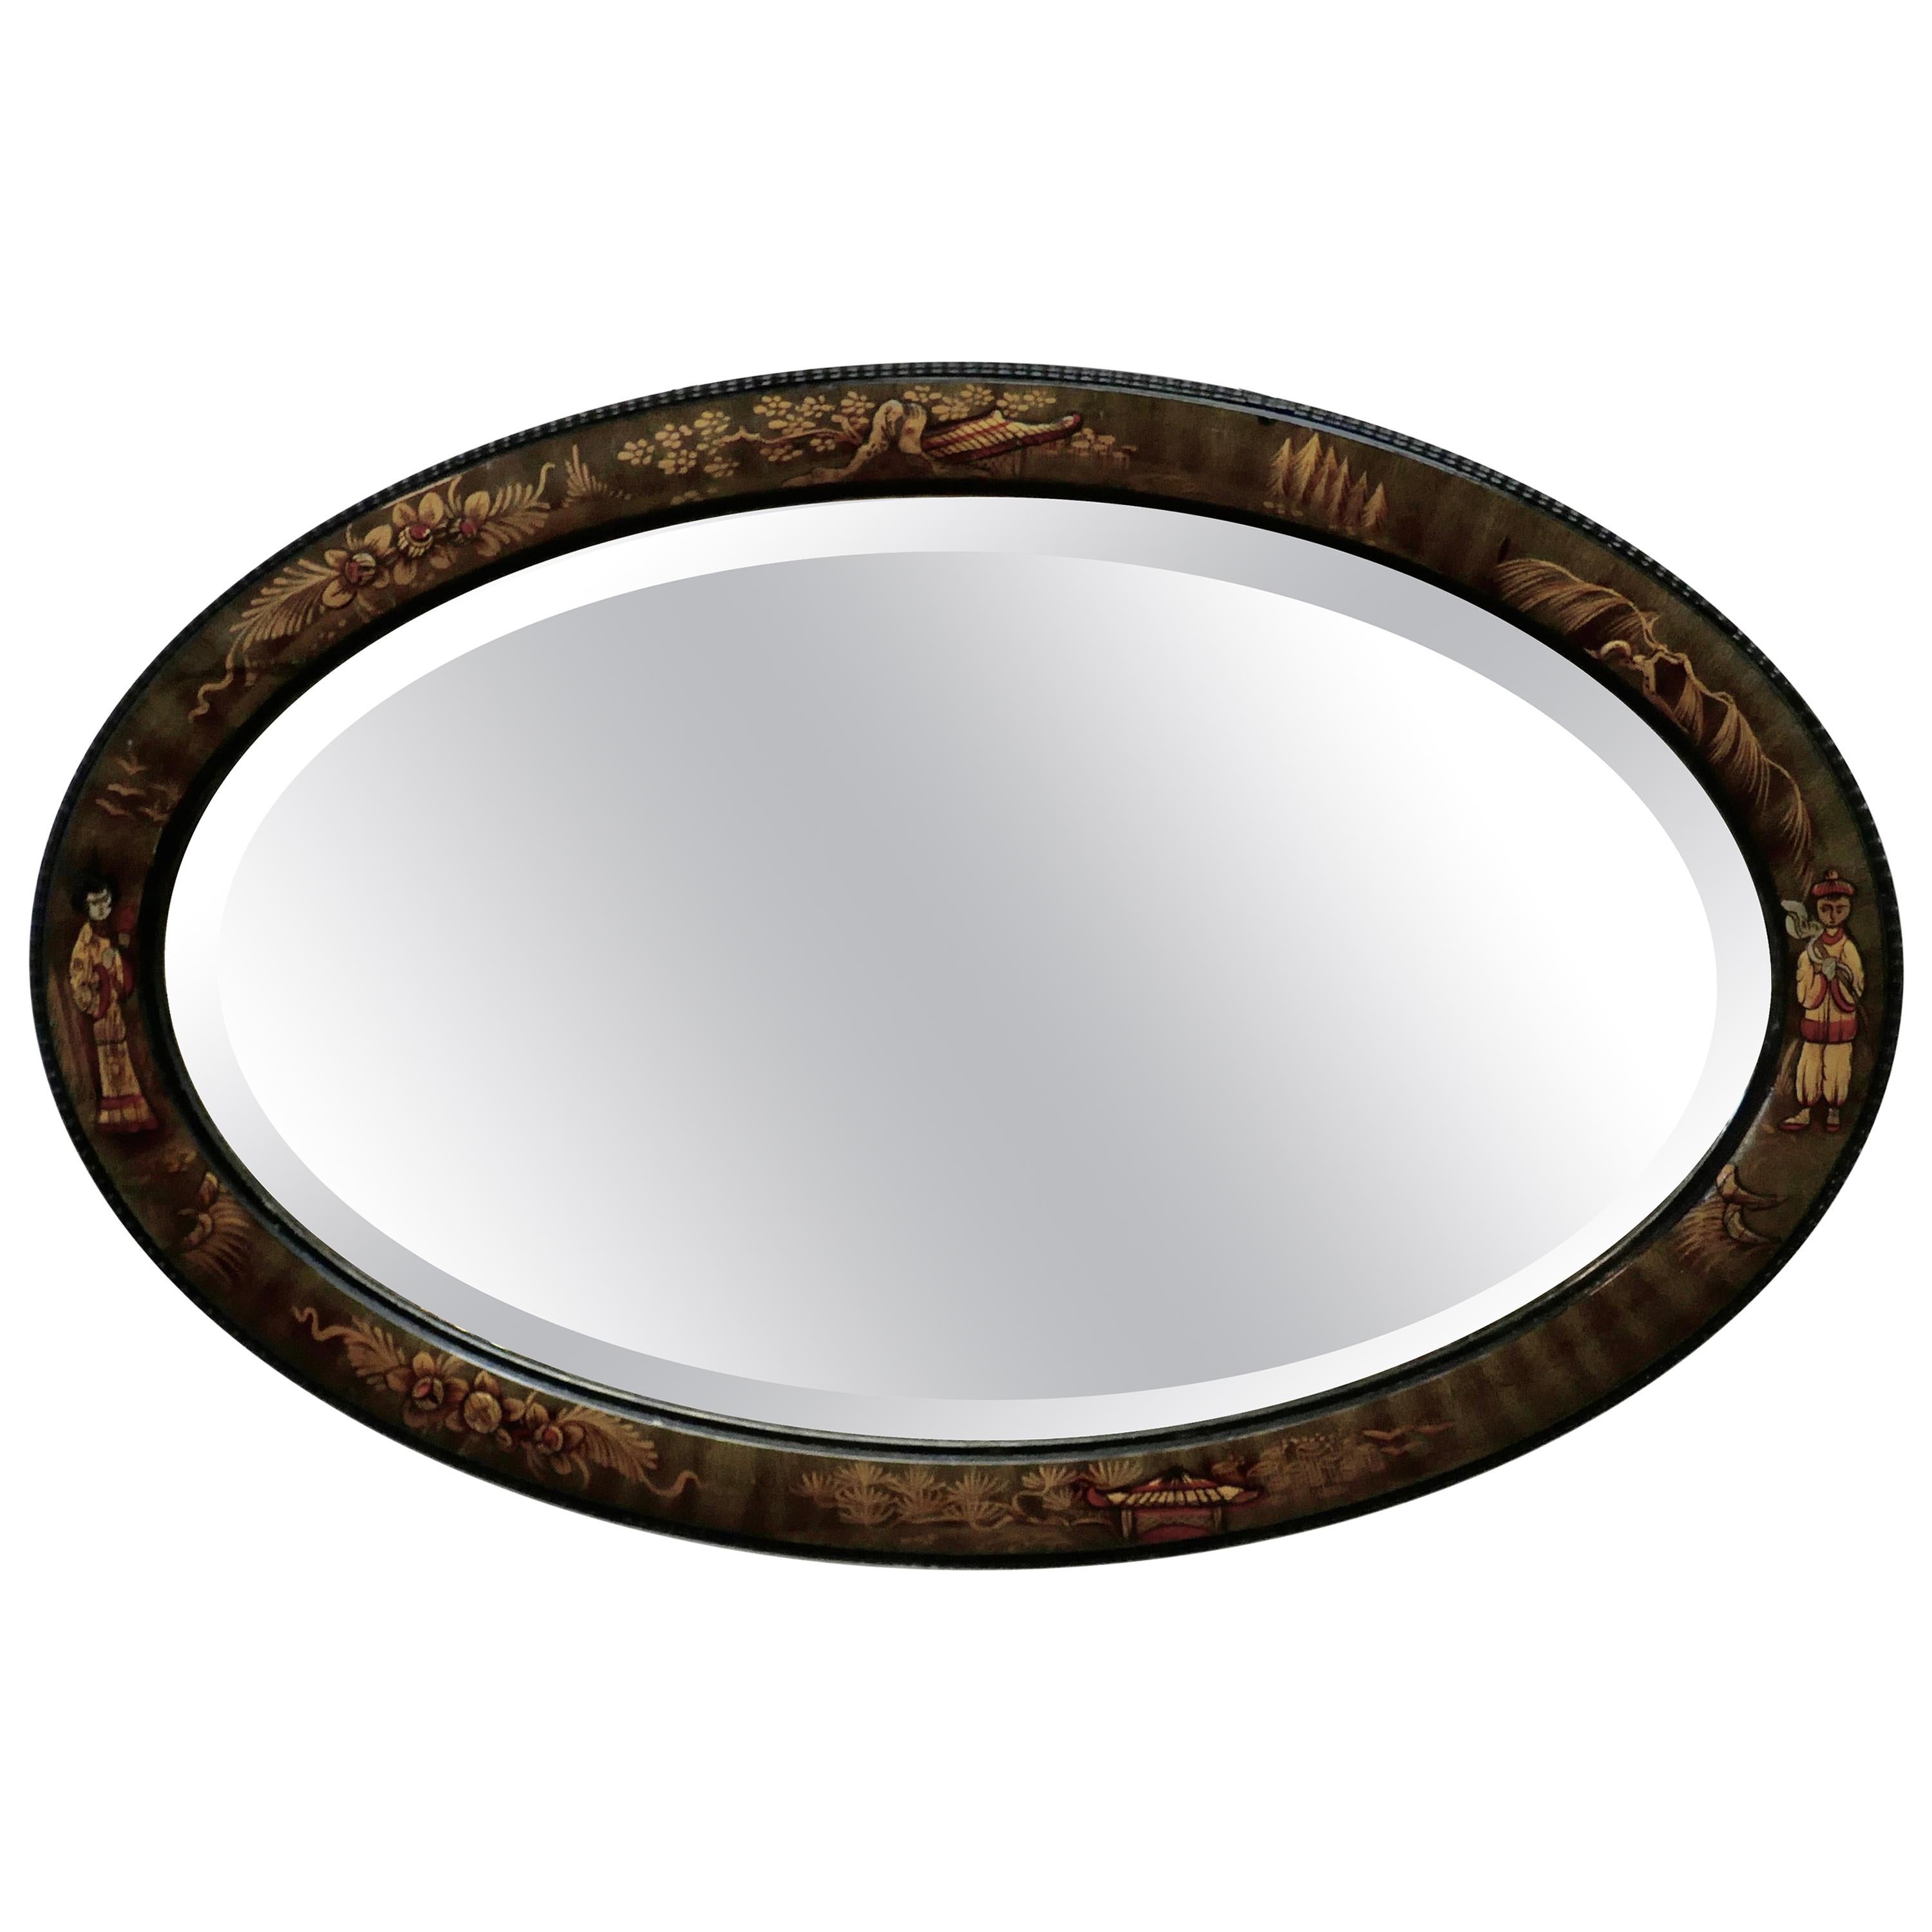 Black Lacquer Chinoiserie Oval Wall Mirror For Sale